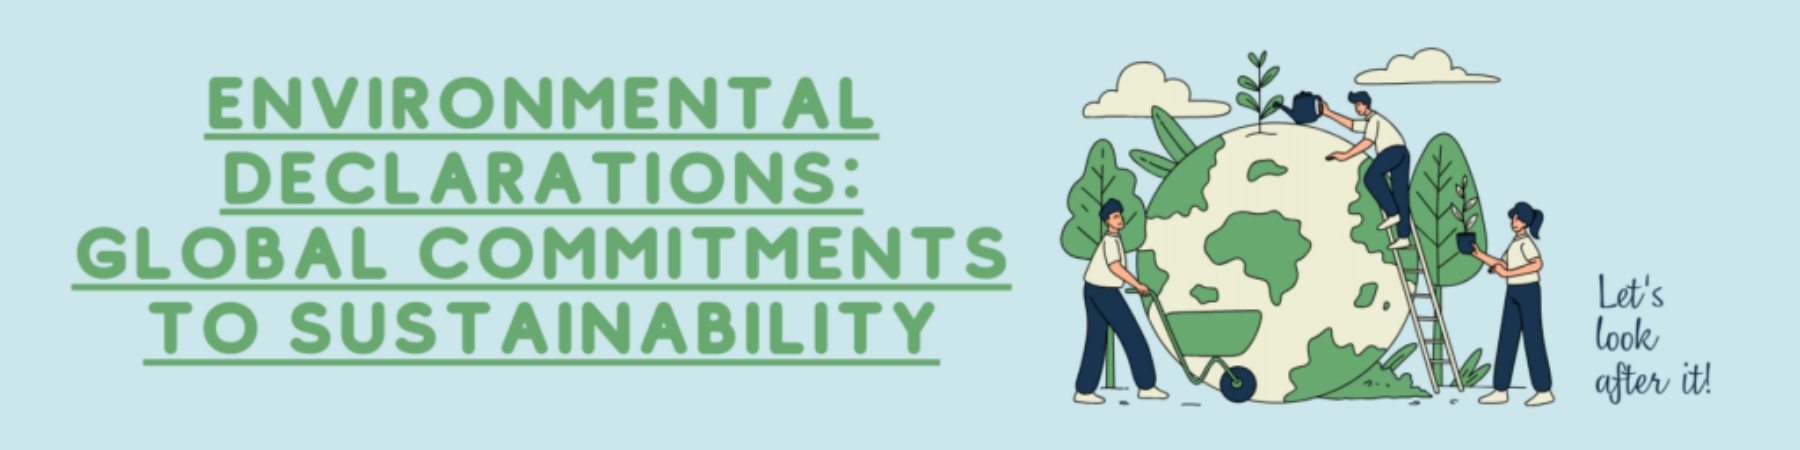 Environmental Declarations_ Global Commitments to Sustainability